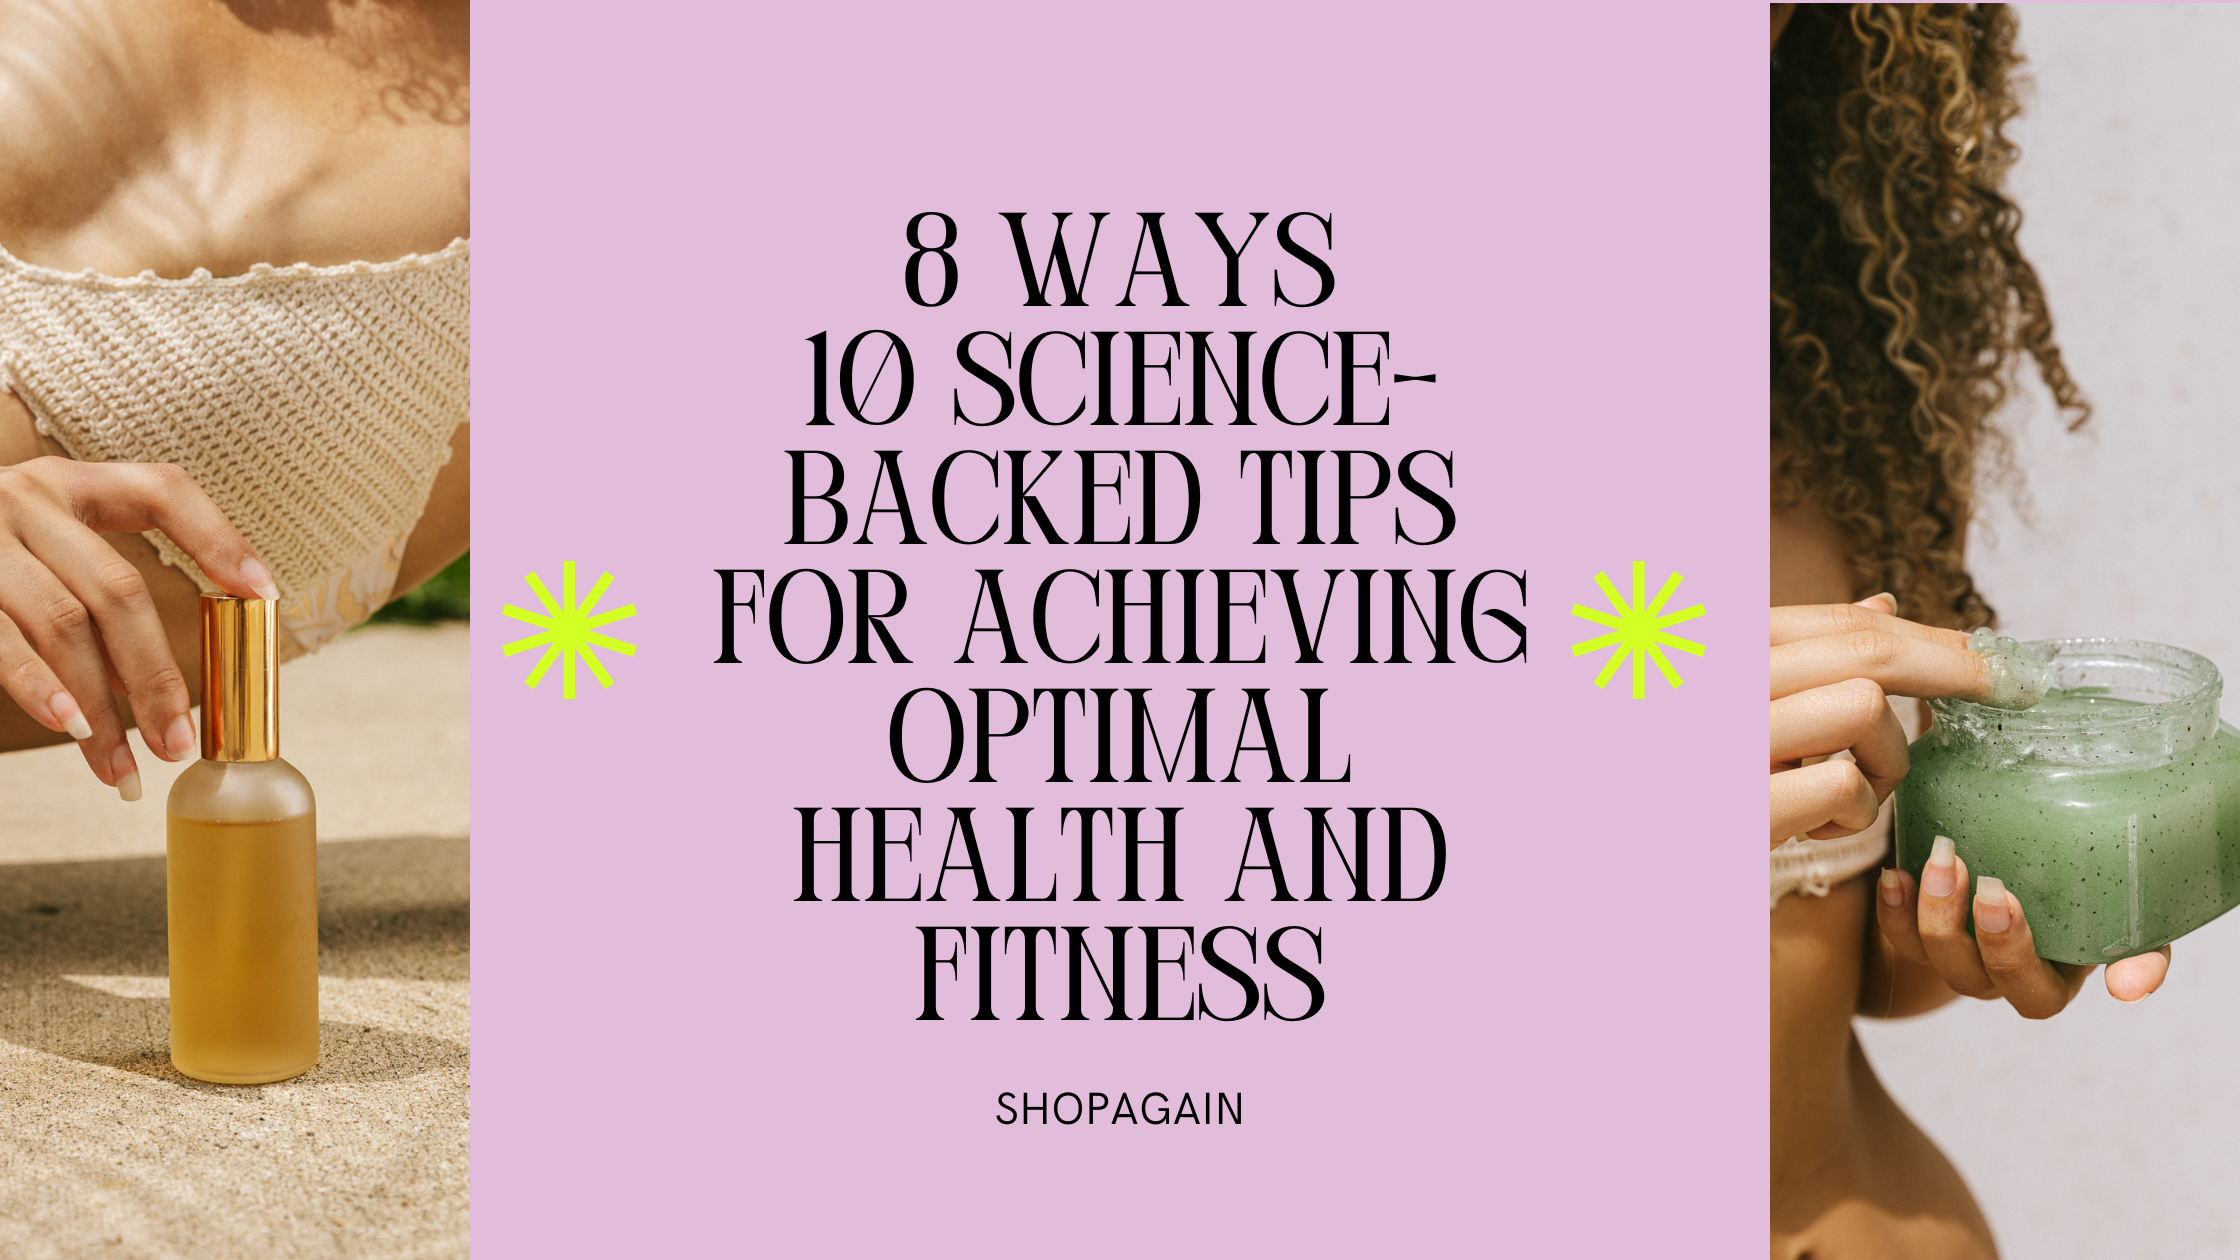 10 Science-Backed Tips for Achieving Optimal Health and Fitness